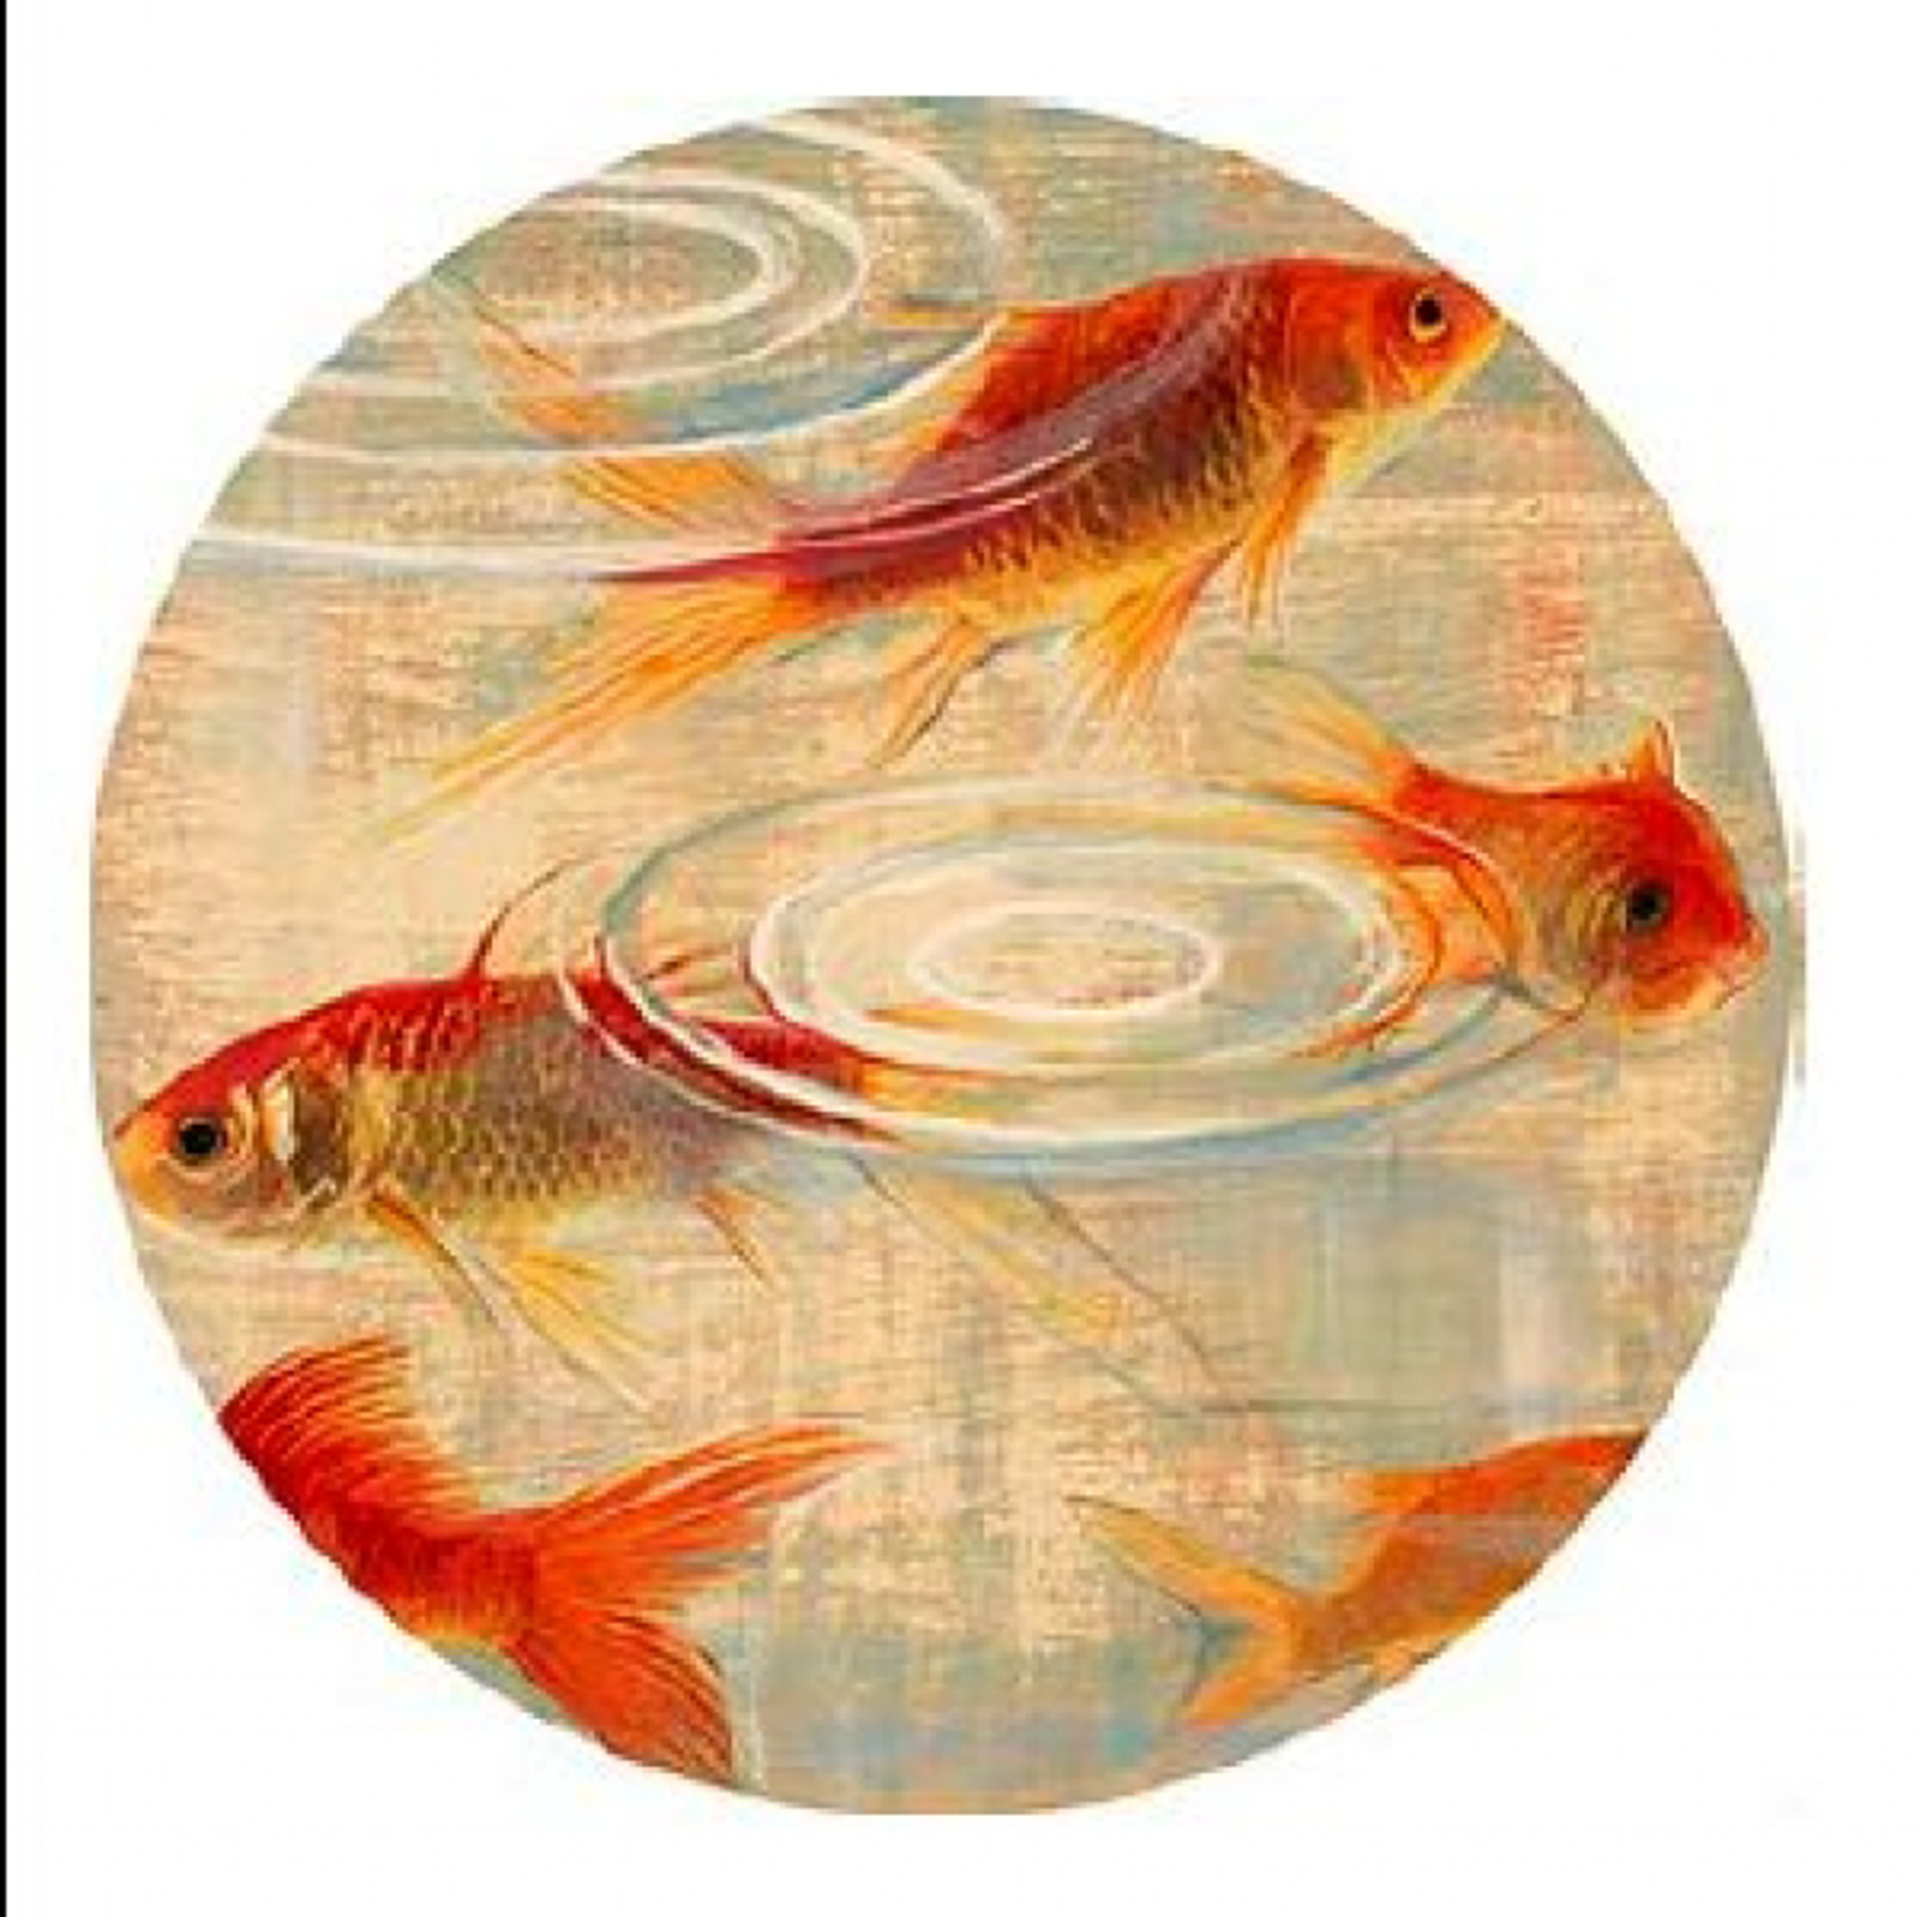 Gold Fish Pond by Mee Shim